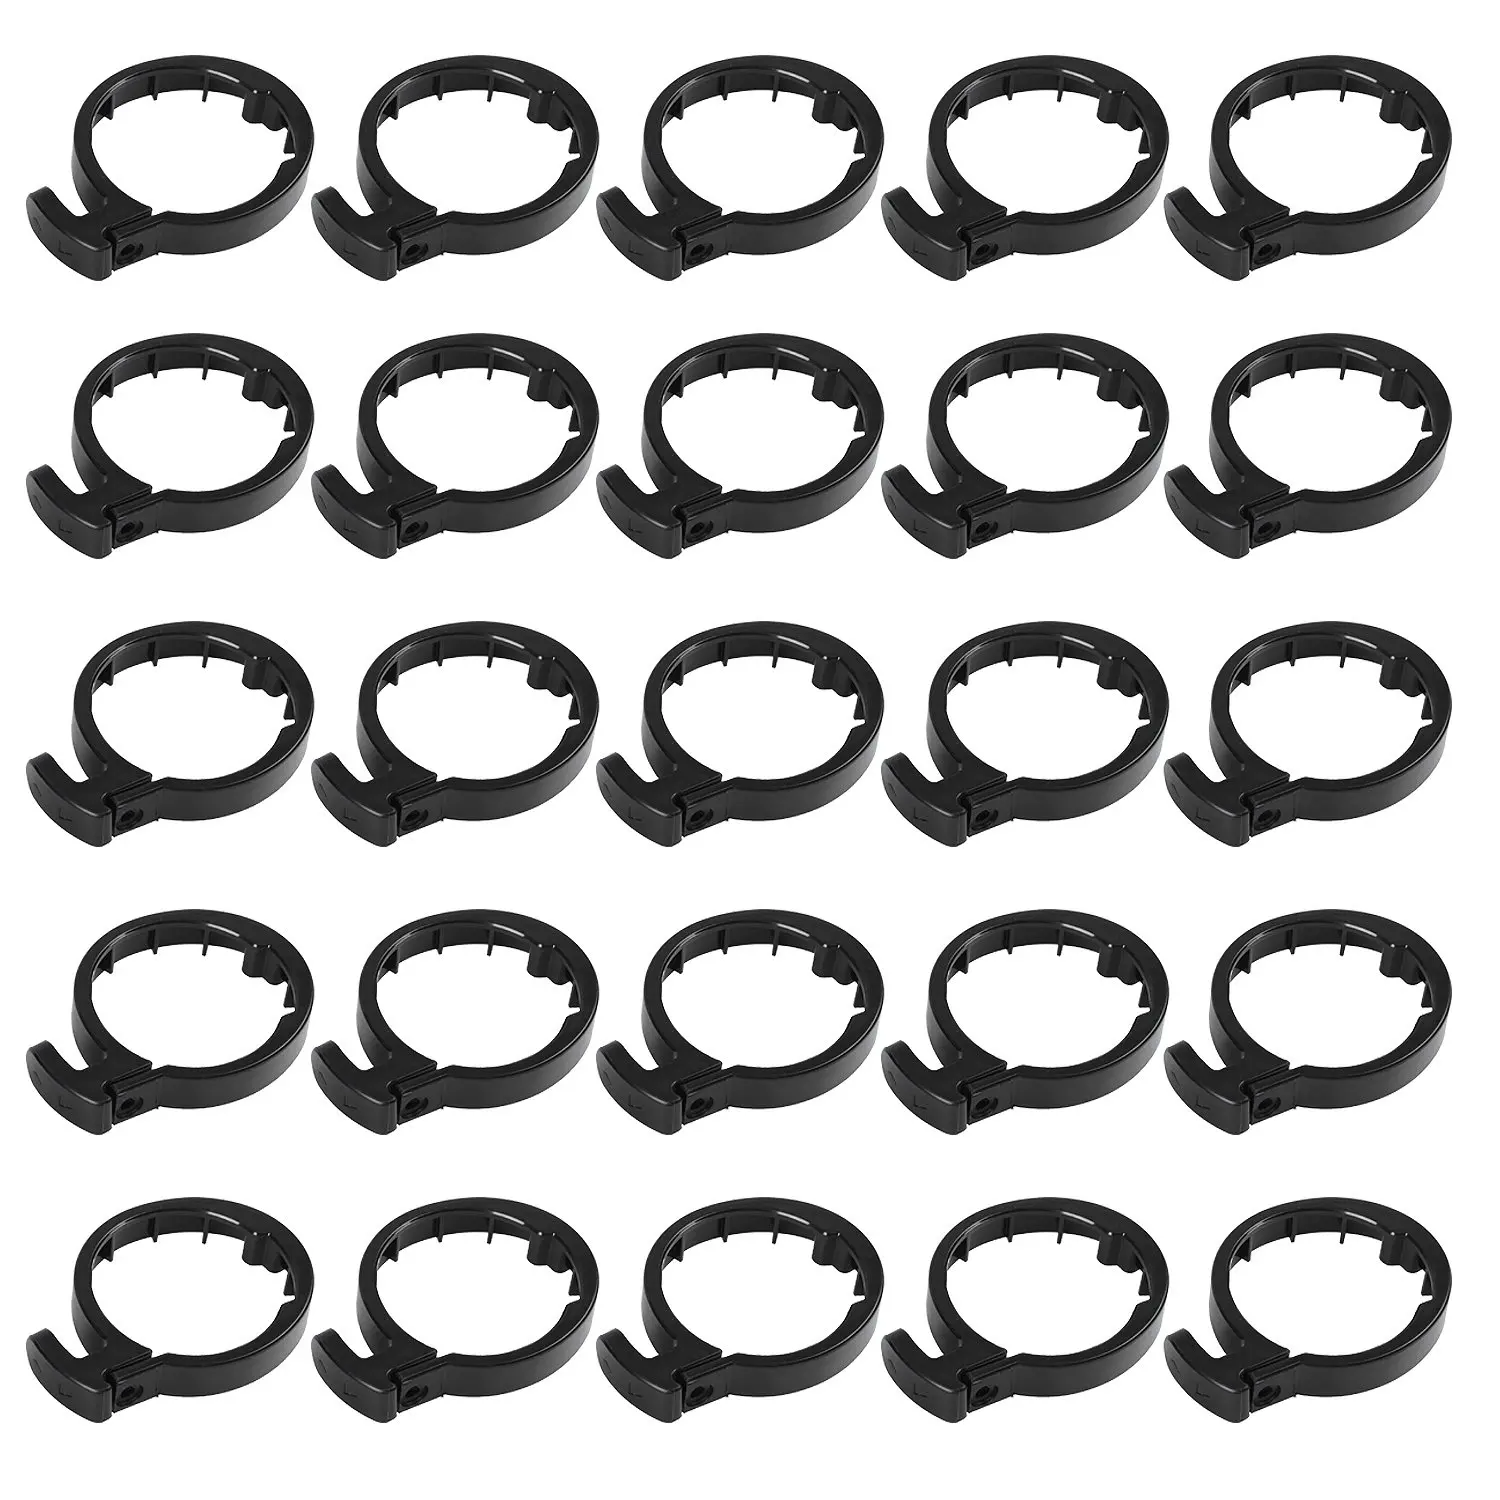 

25Pcs Electric Scooter Front Tube Stem Folding Insurance Circle Guard Ring Replacement Part for Xiaomi Mijia M365